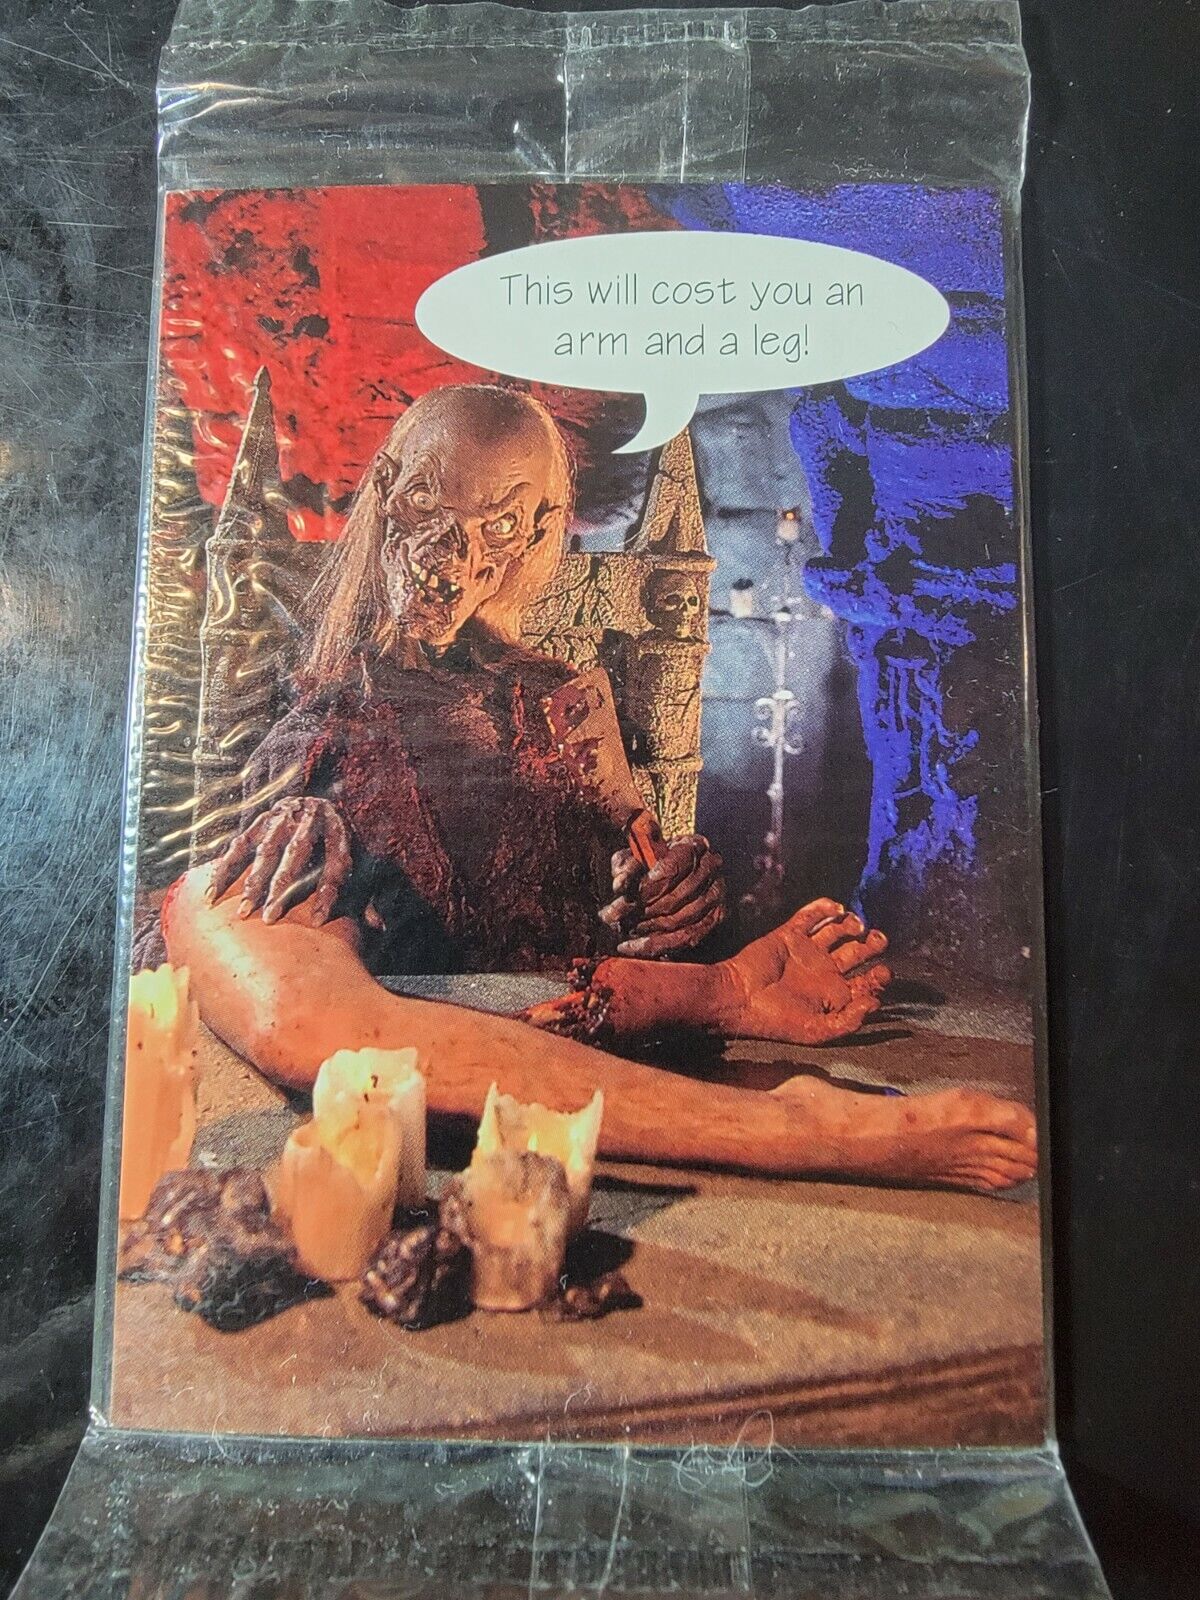 1993 Cardz Tales From The Crypt Prototype Card Set of 4 Sealed